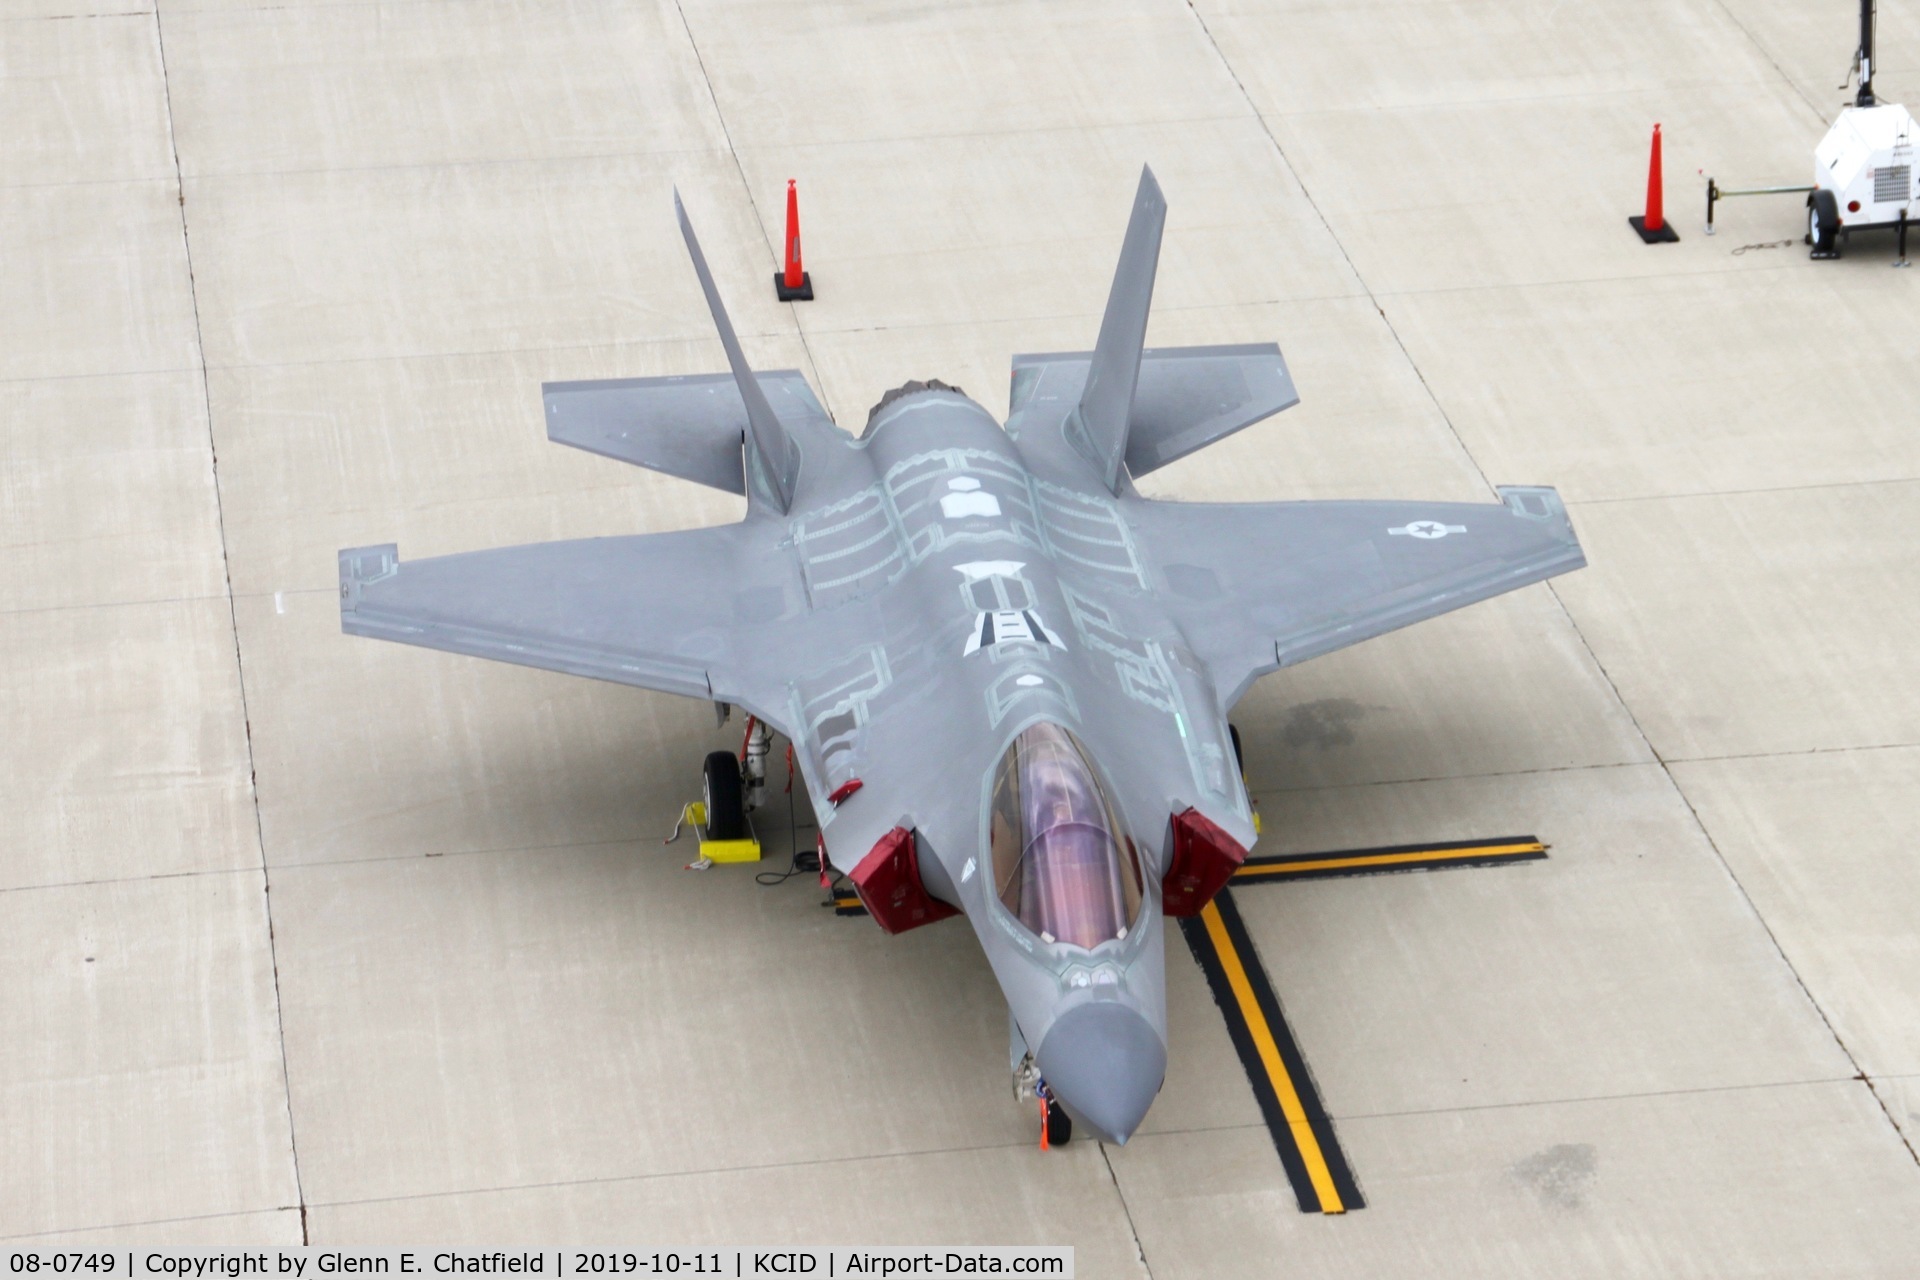 08-0749, 2011 Lockheed Martin F-35A Lightning II C/N AF-11, Photographed from the control tower